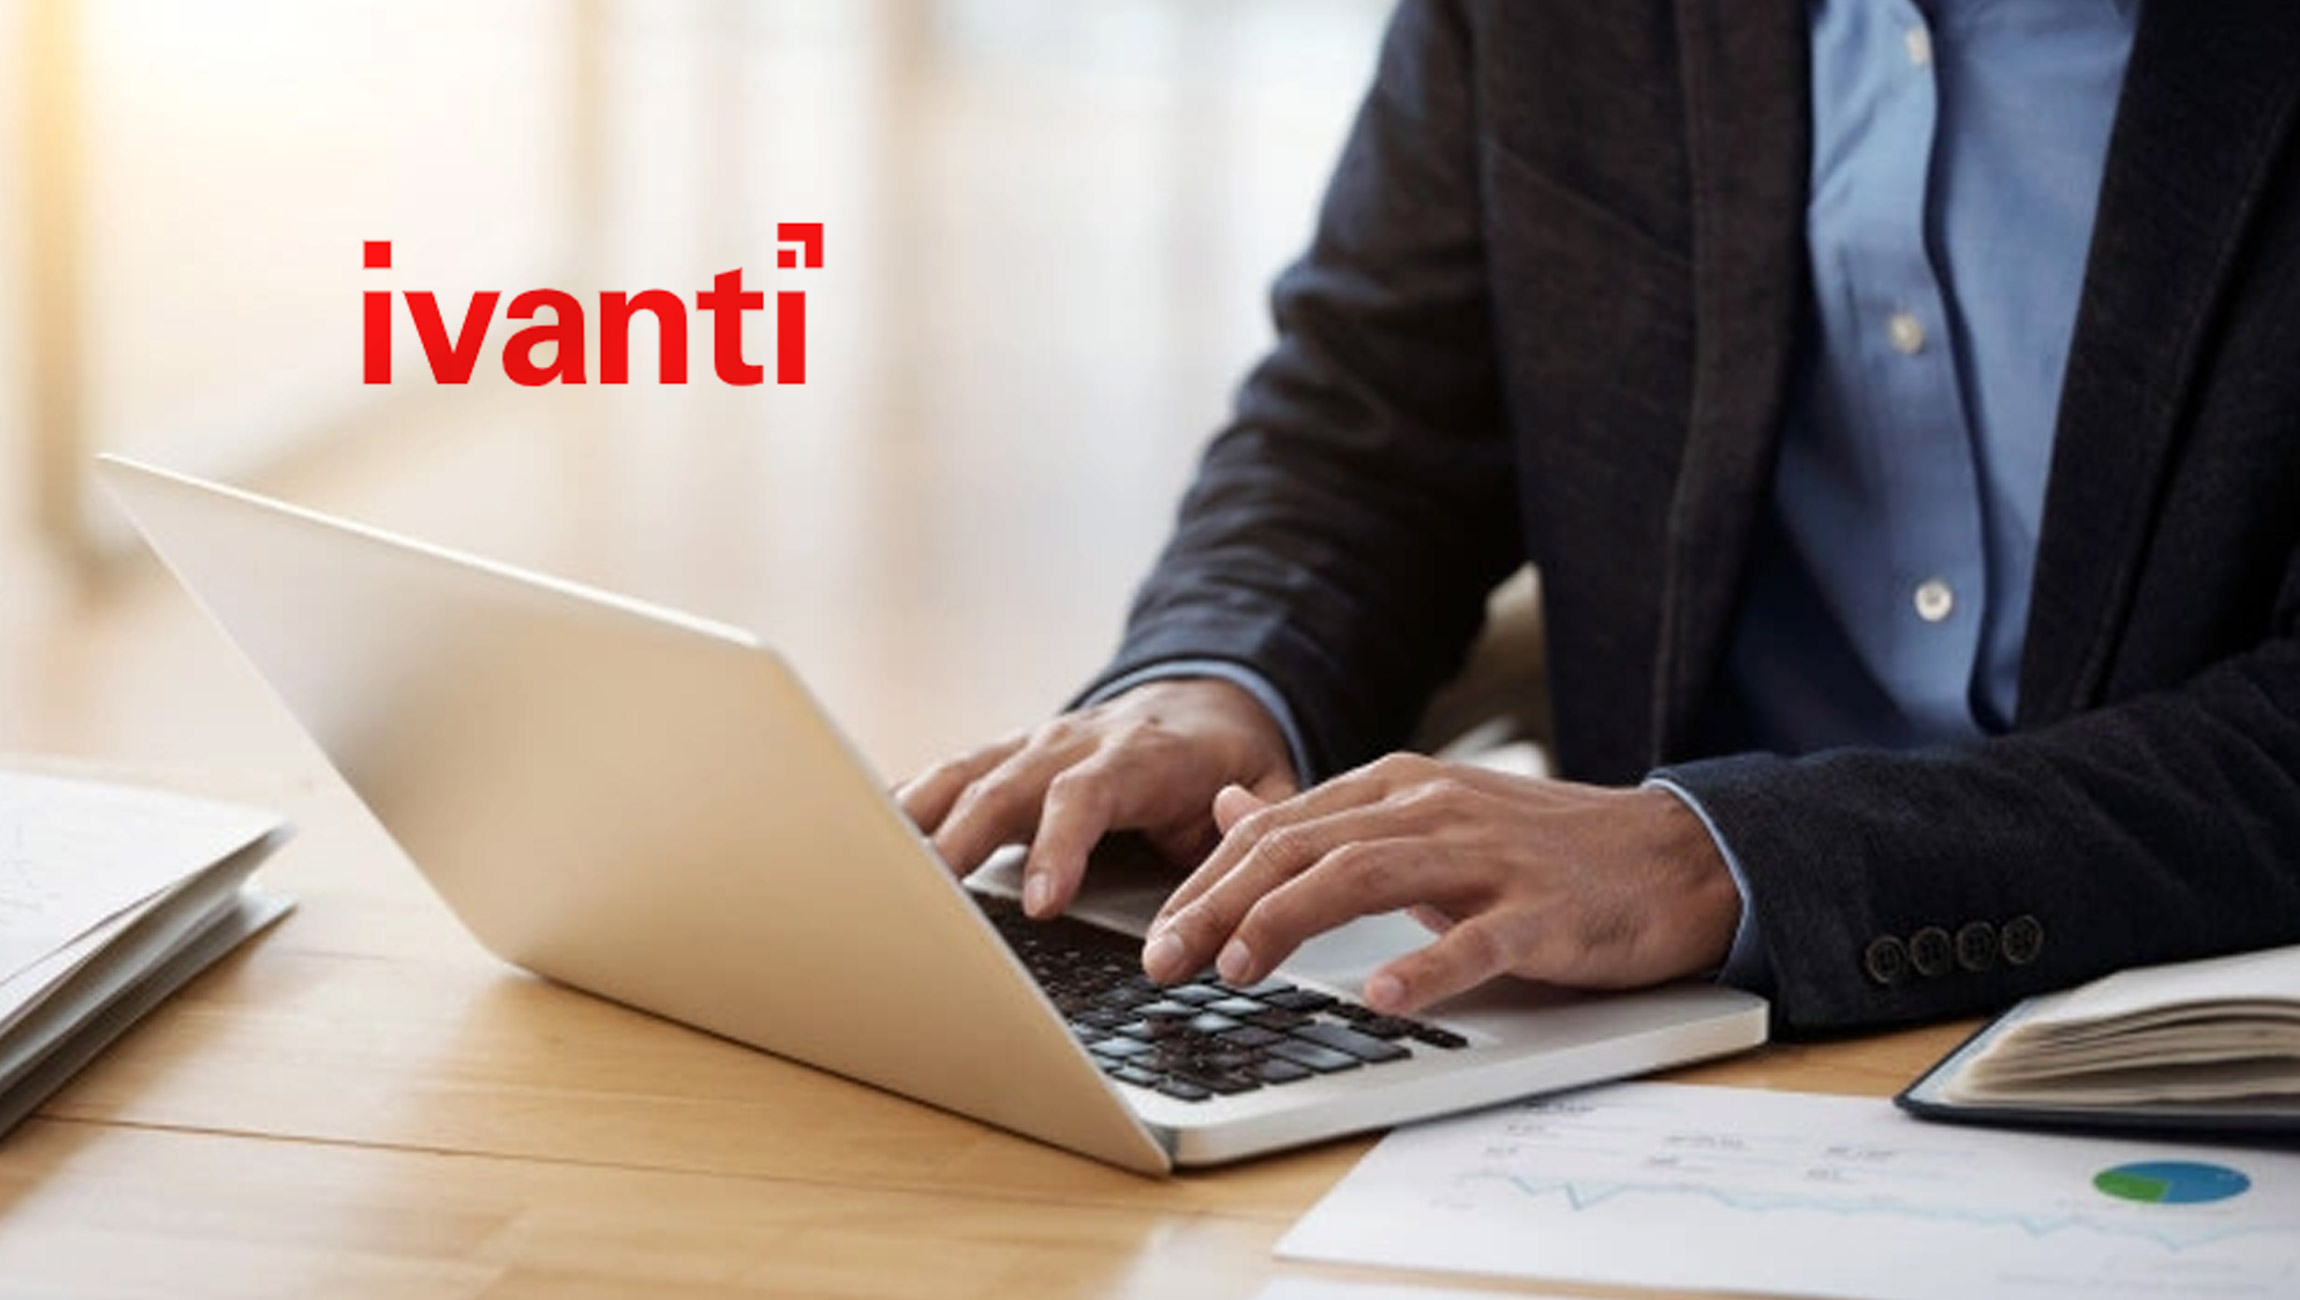 Ivanti Expands Advantage Learning Services for Improved Customer Support